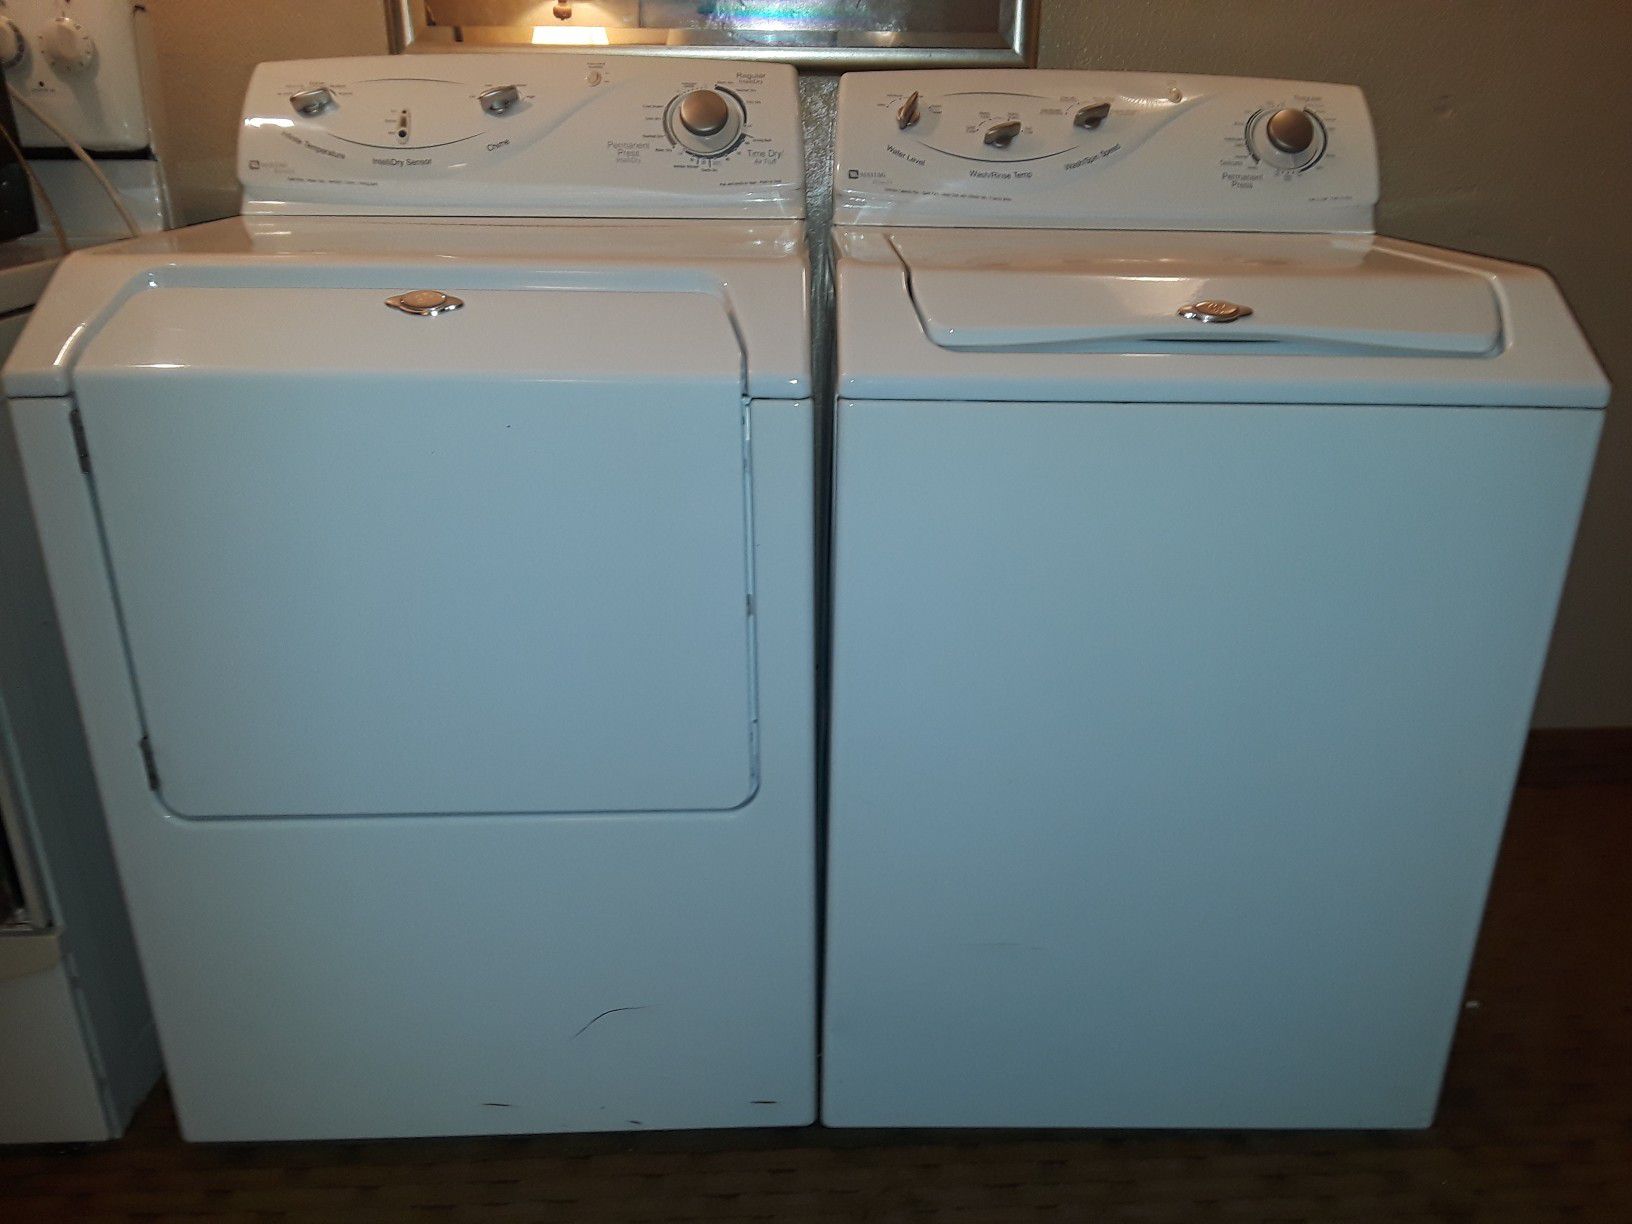 Maytag Atlantis washer and gas dryer